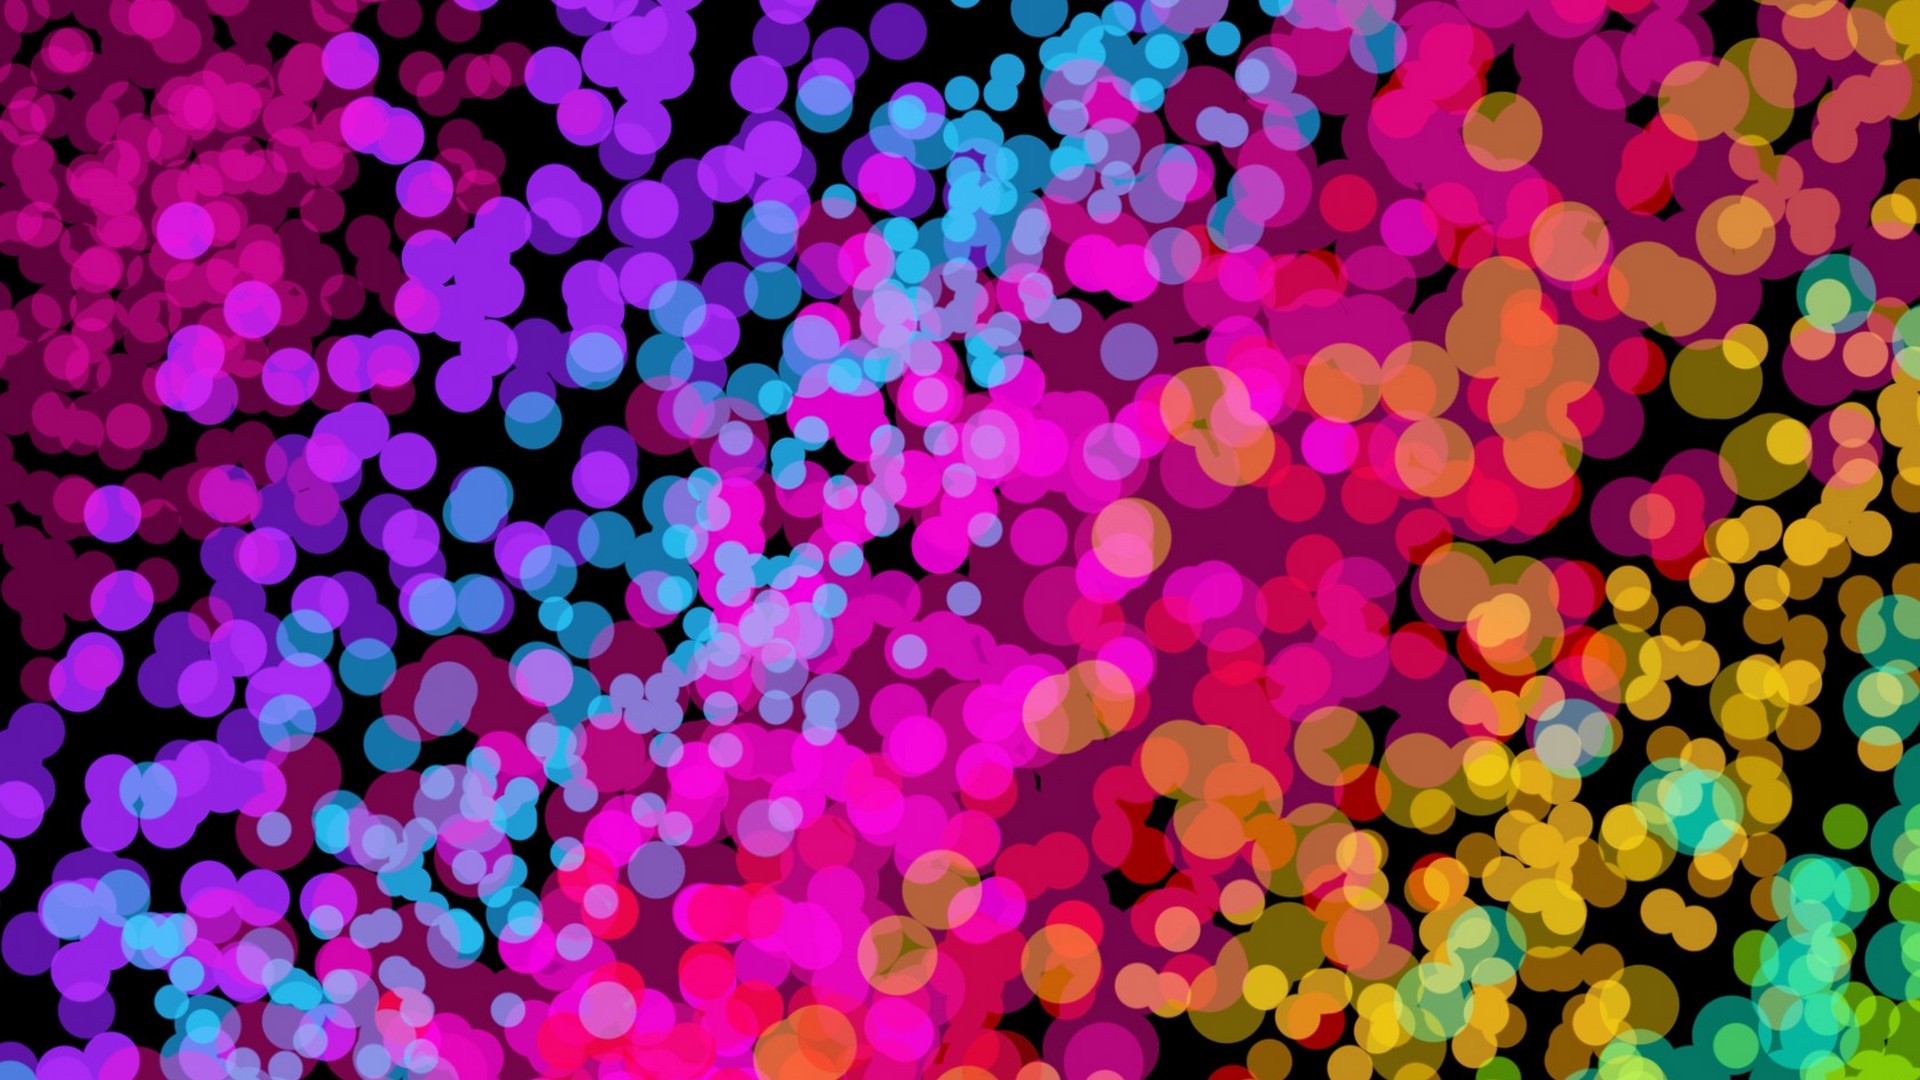 HD Light Colorful Backgrounds With high-resolution 1920X1080 pixel. You can use this wallpaper for your Windows and Mac OS computers as well as your Android and iPhone smartphones